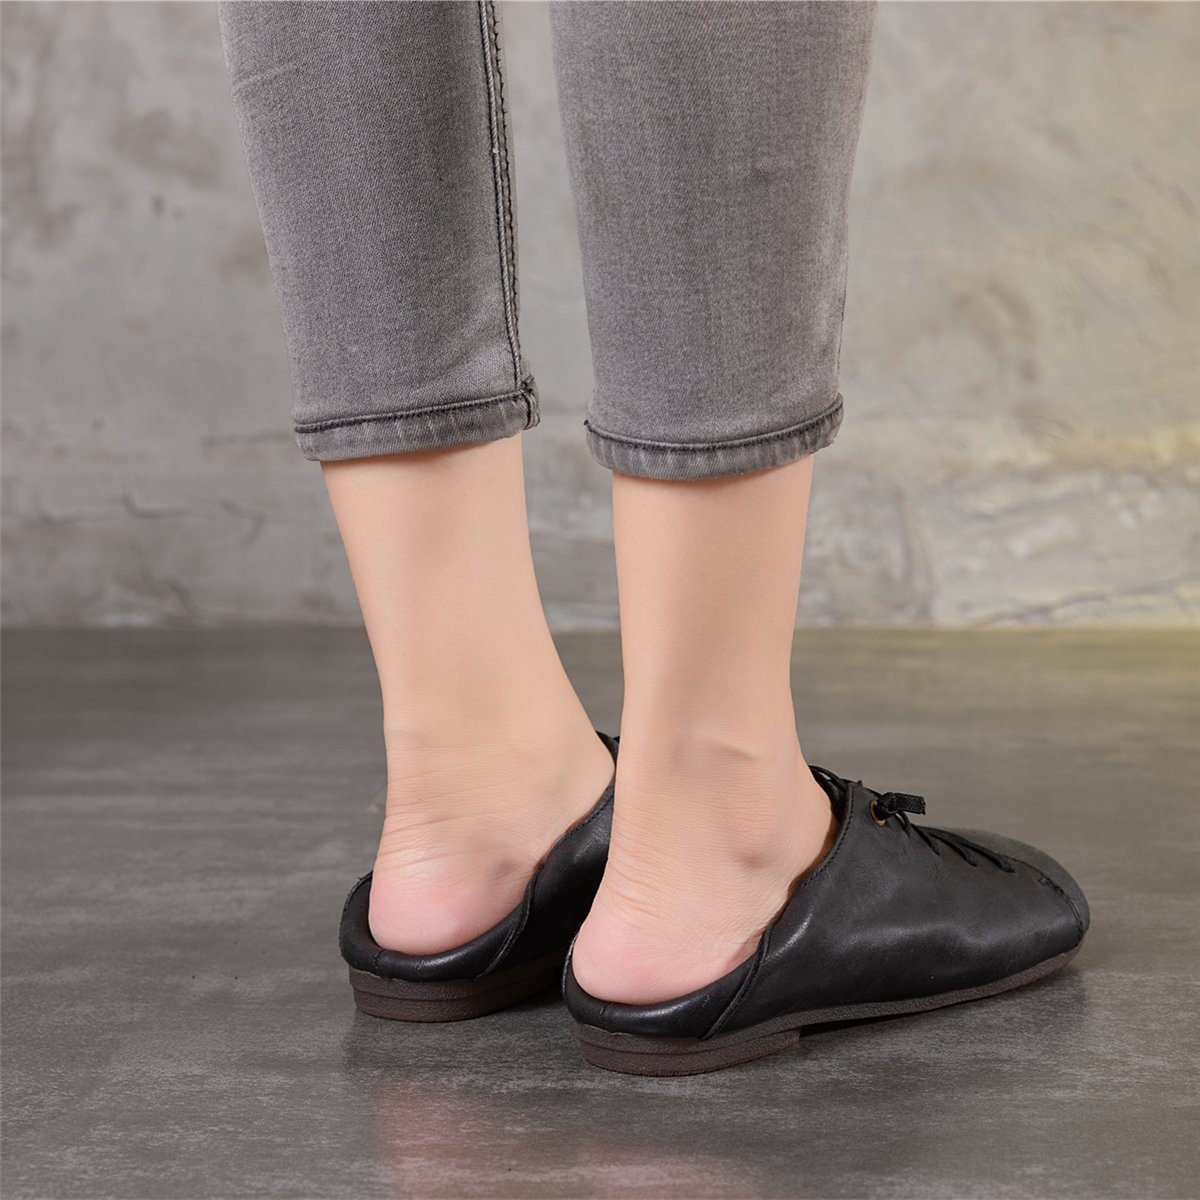 Handmade Flats Lace Up Oxford Shoes Rubber Soles Loafers Slip Ons Flaty Shoes Black